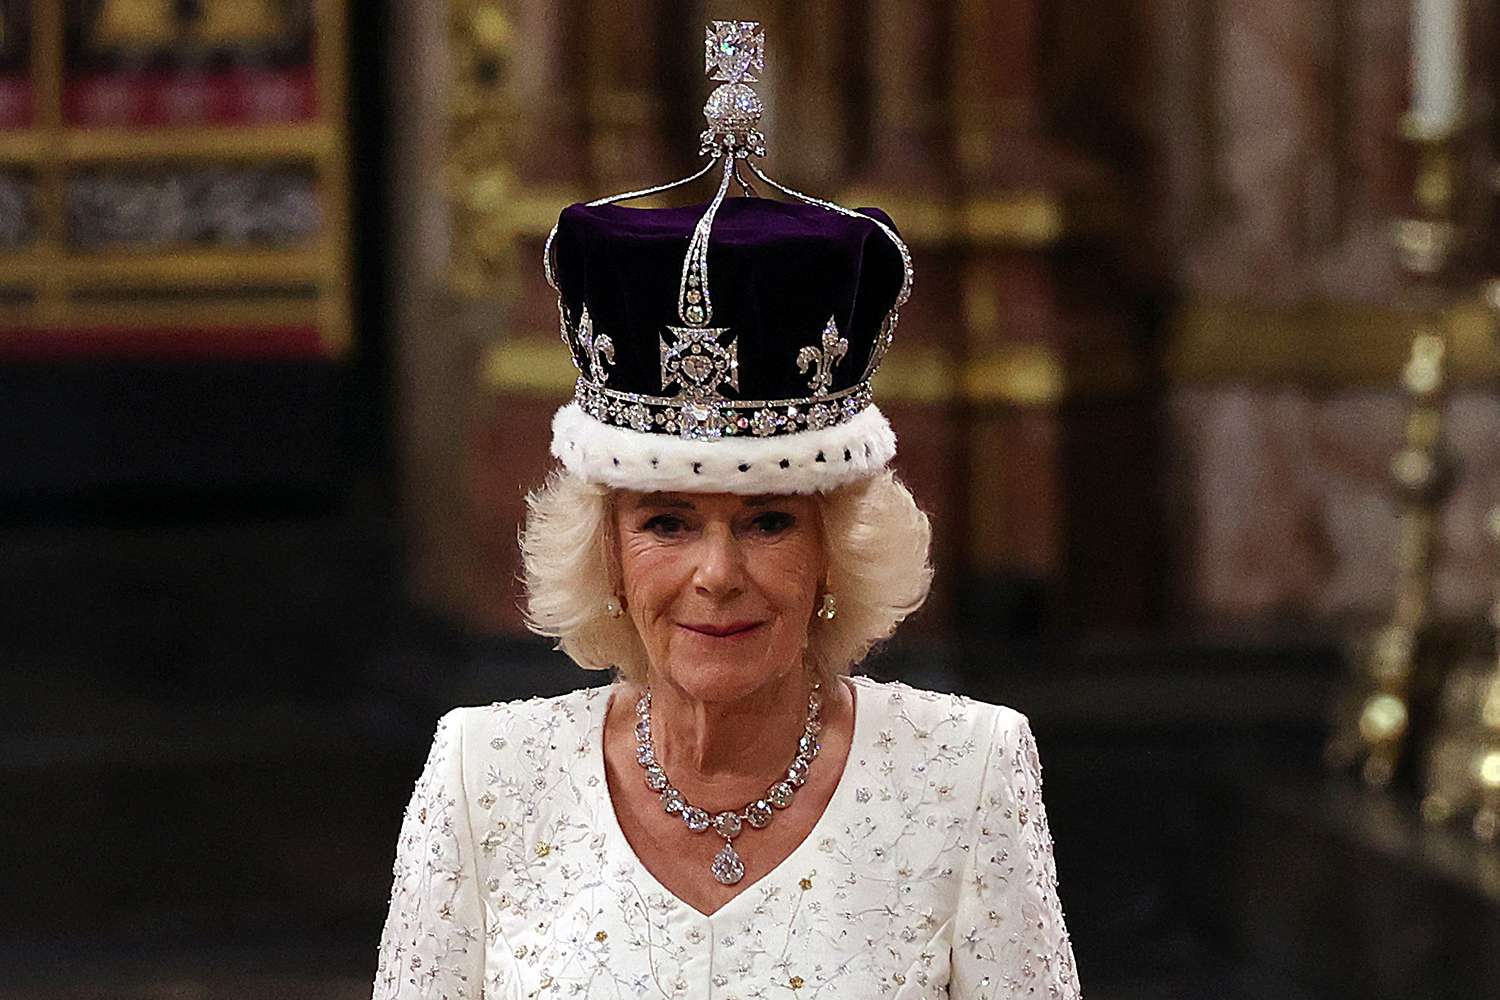 Queen Camilla's Coronation Outfit: All About Her Ensemble and Crown